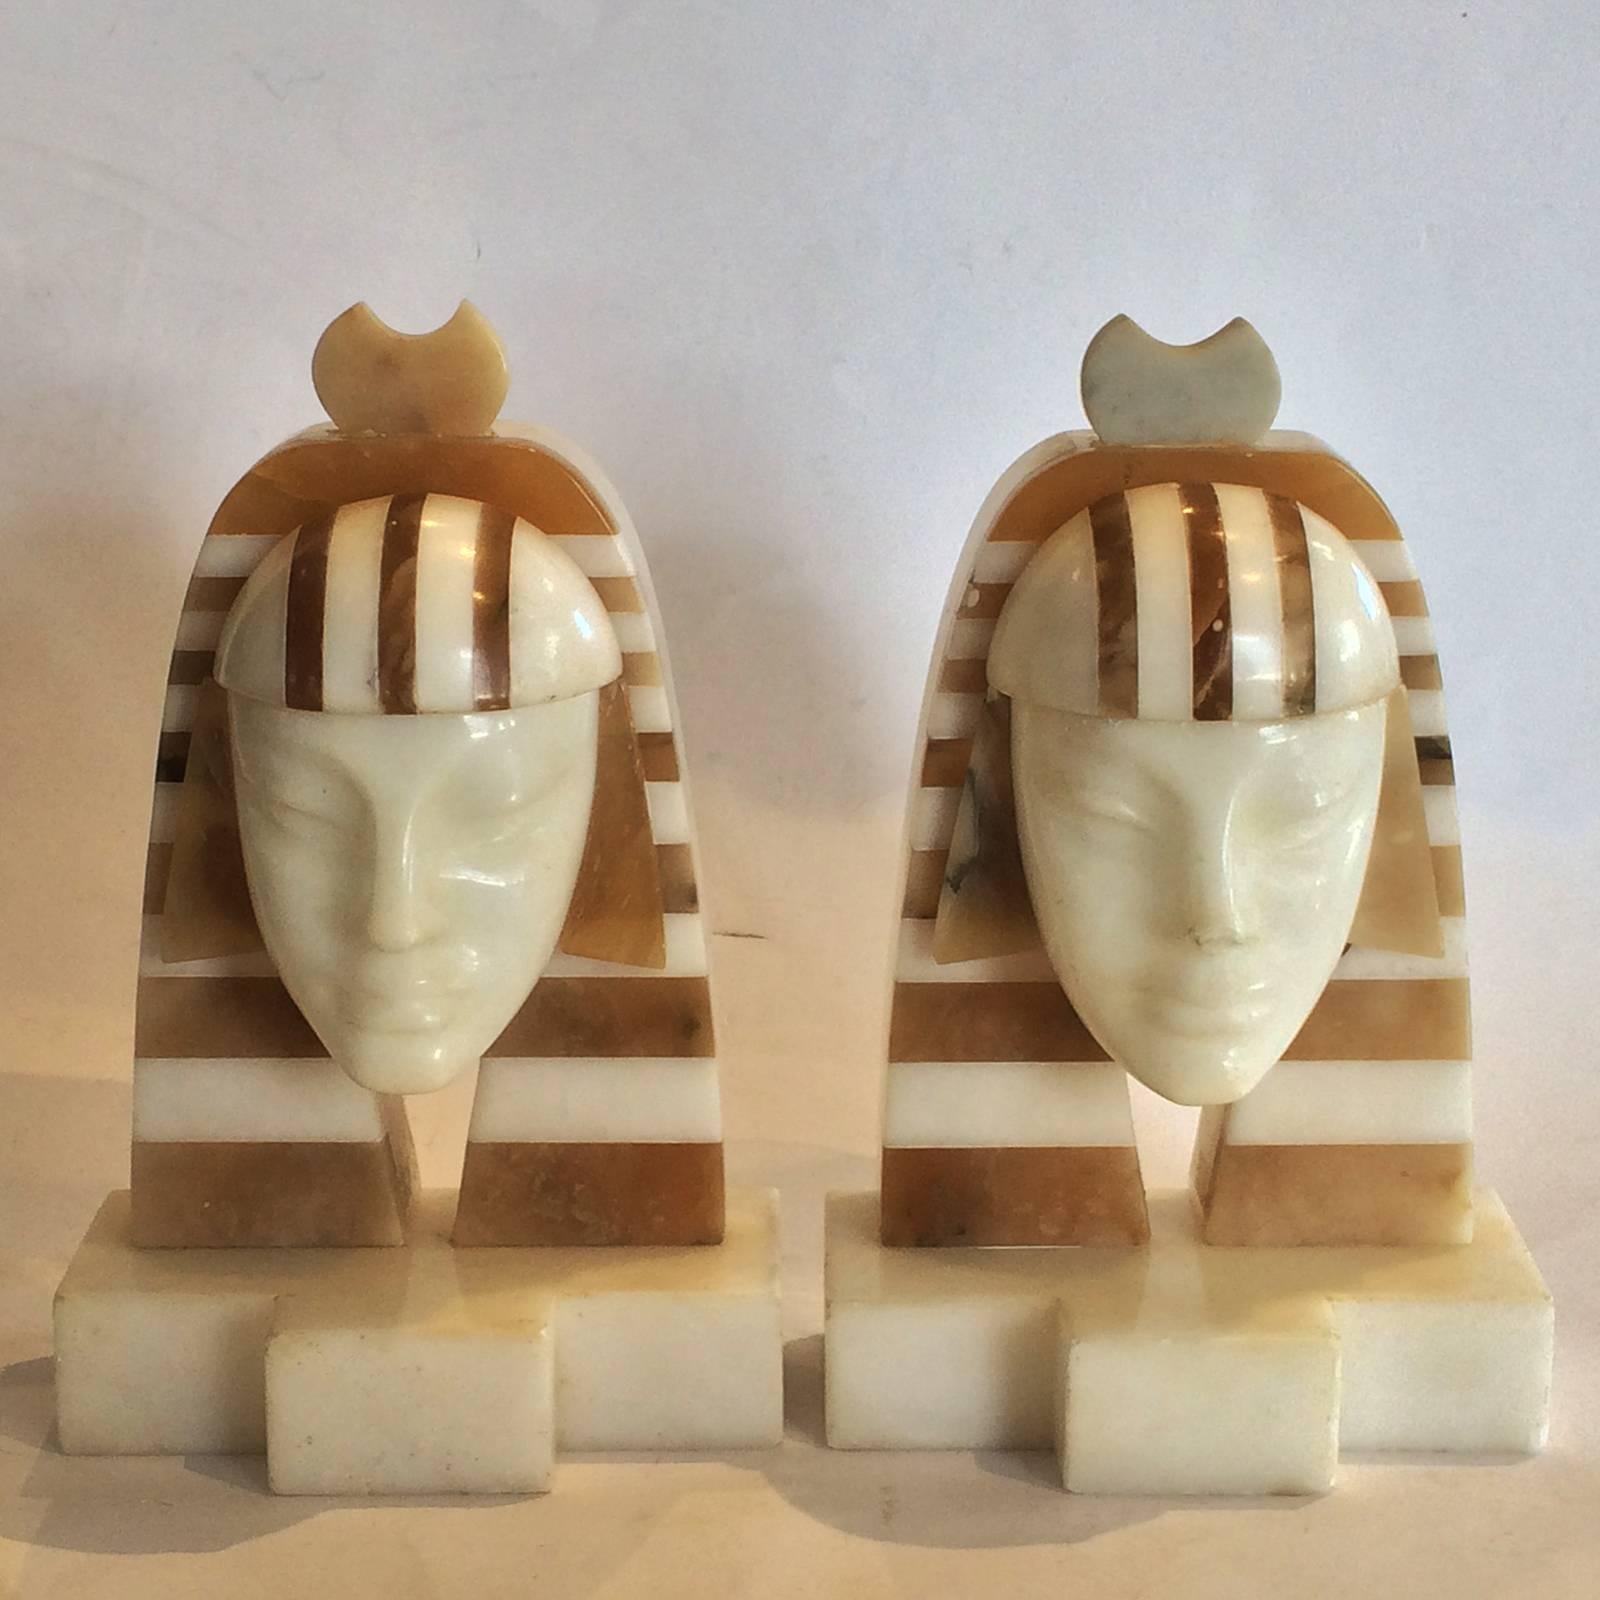 Art Deco Egyptian Revival Bookends in form of a pair of Tutankhamen Faces in Marble and Alabaster. An outstanding example of fine design, with intricate fabrication of “layered” Alabaster to create the Headdress and tapering sides, narrow stripes at